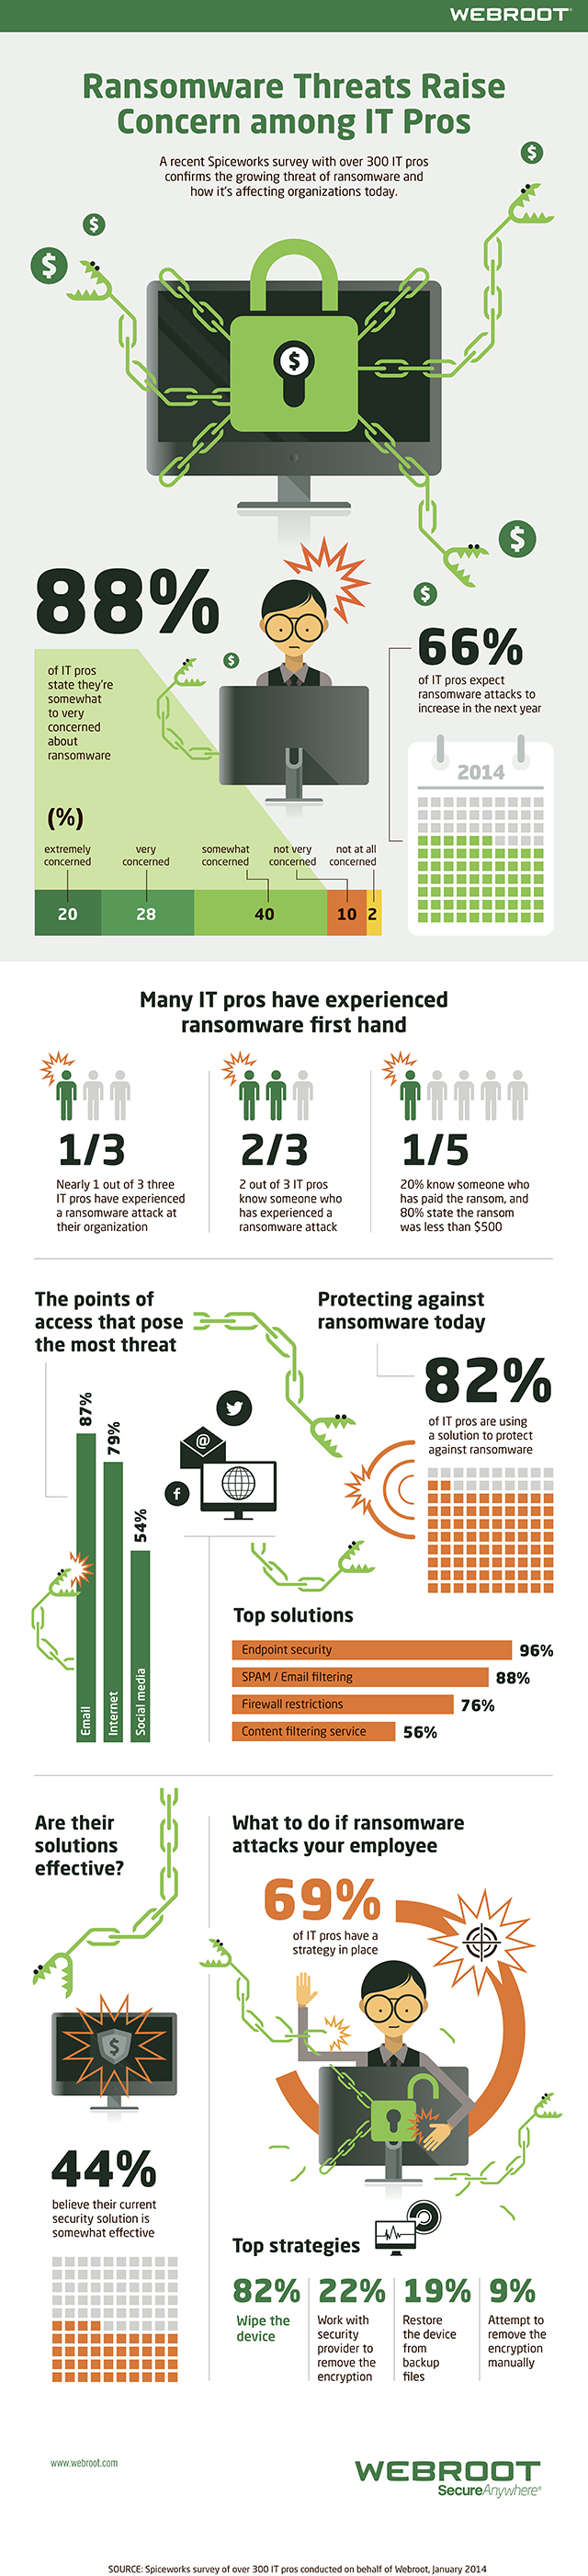 INFOGRAPHIC - Webroot - Ransomware Threats Raise Concern among I